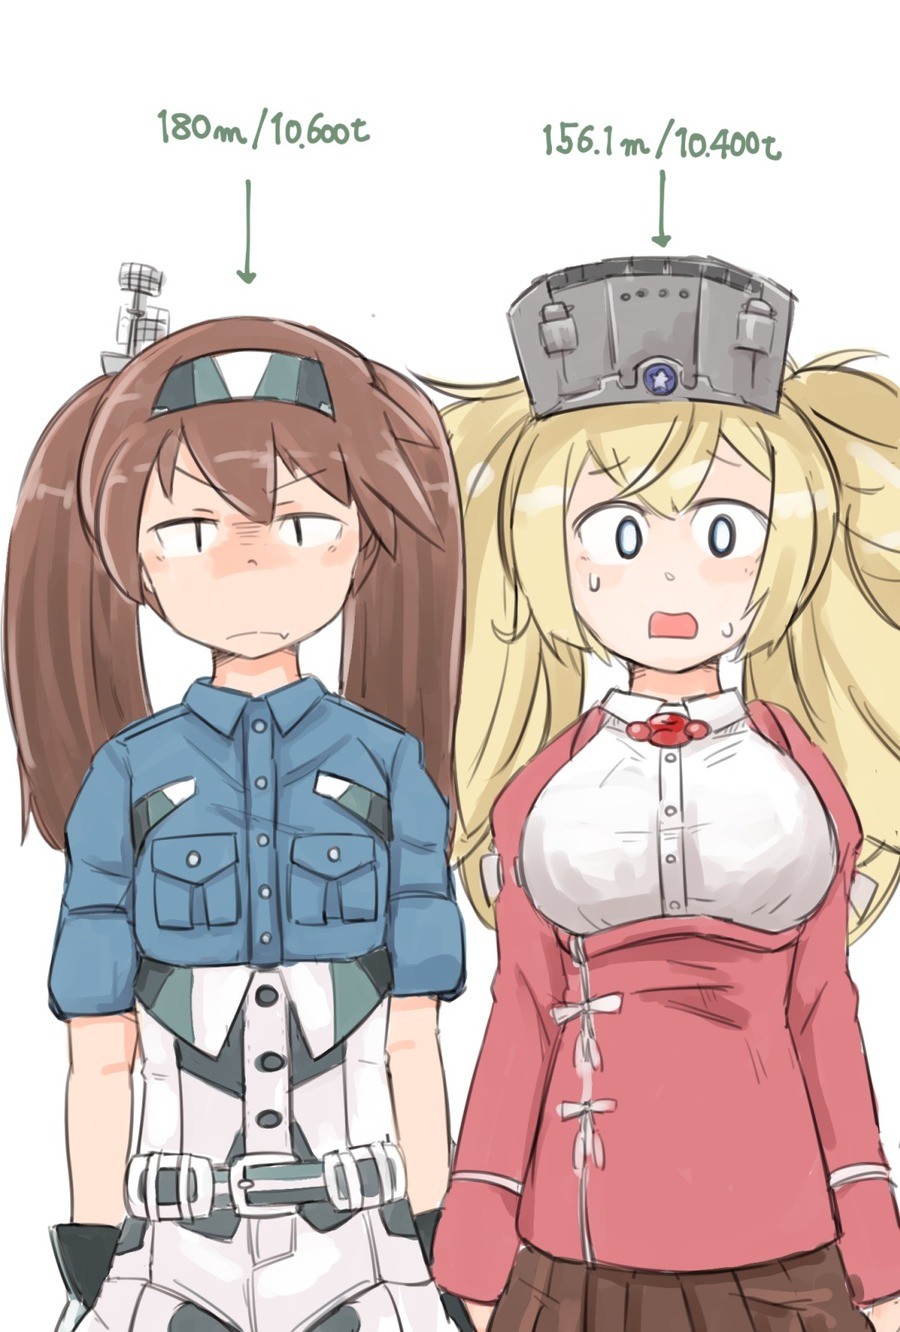 Gambier Bay & Ryuujou. join list: CuteBoatStuff (212 subs)Mention History join list:. join list: KantaiCollectionMention History